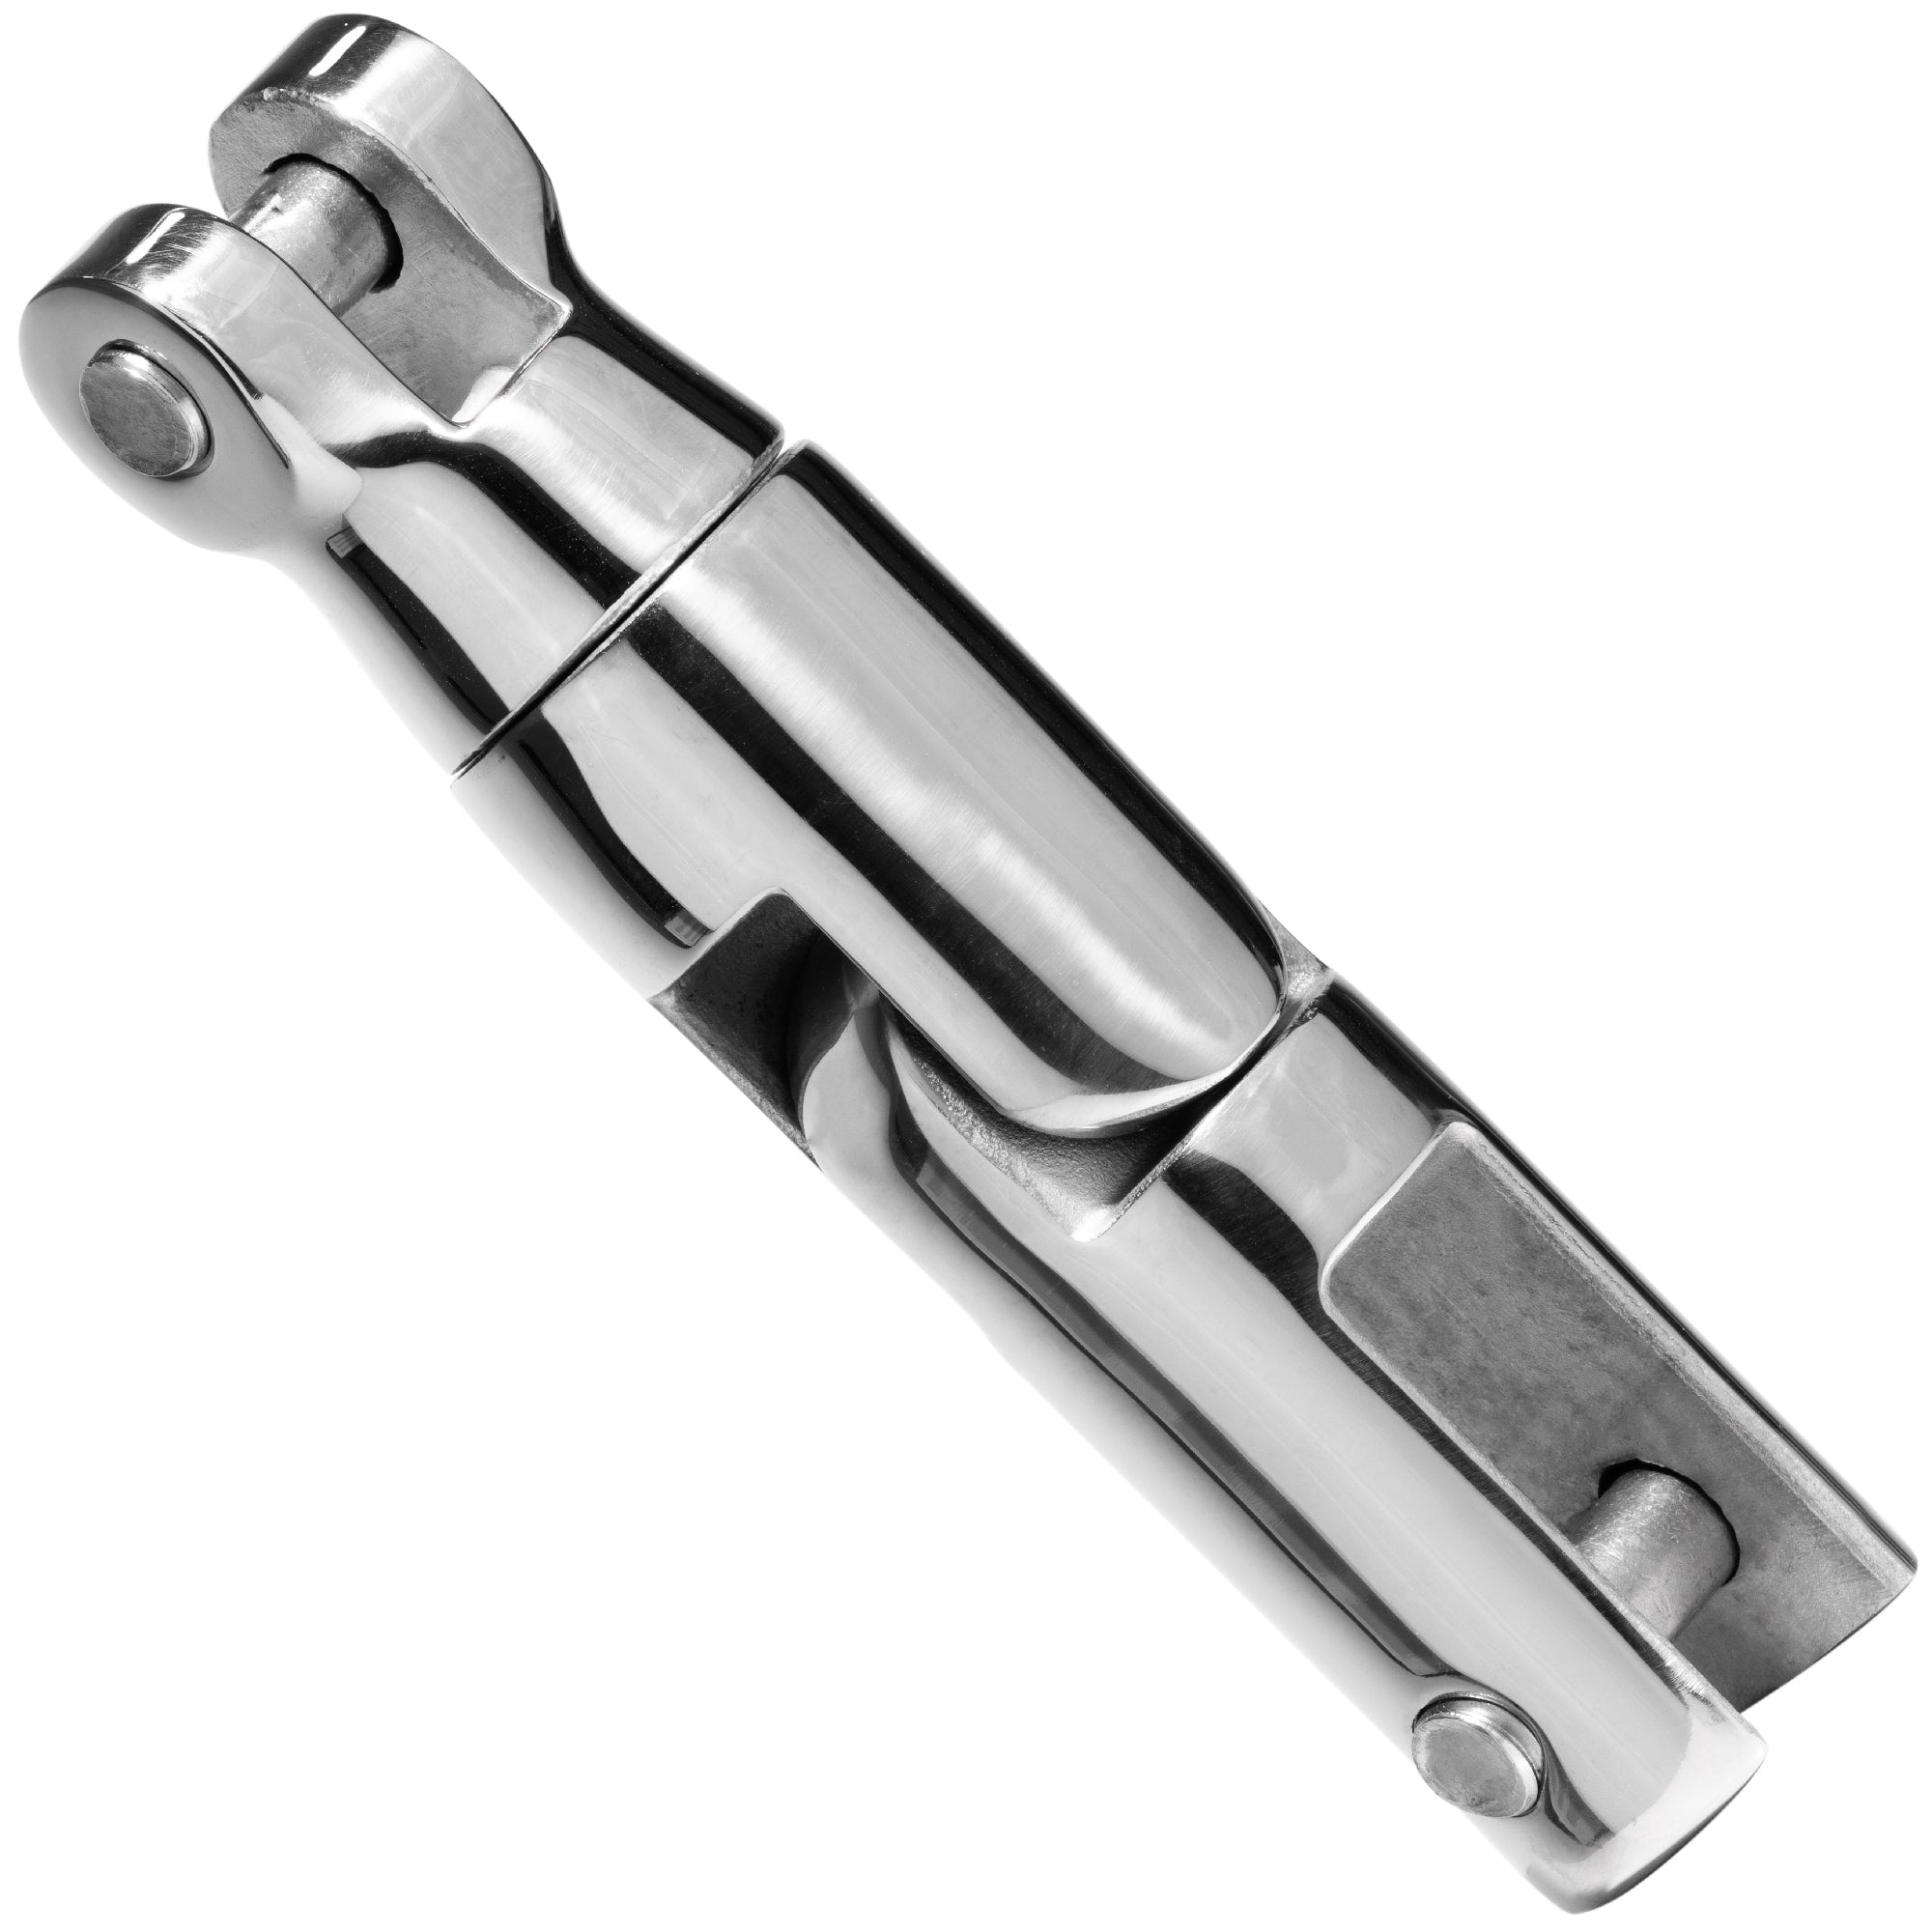 Multi-directional Anchor Double Swivel Connector, Up to 1/2 in. Chain, AISI316 Stainless Steel FO-385